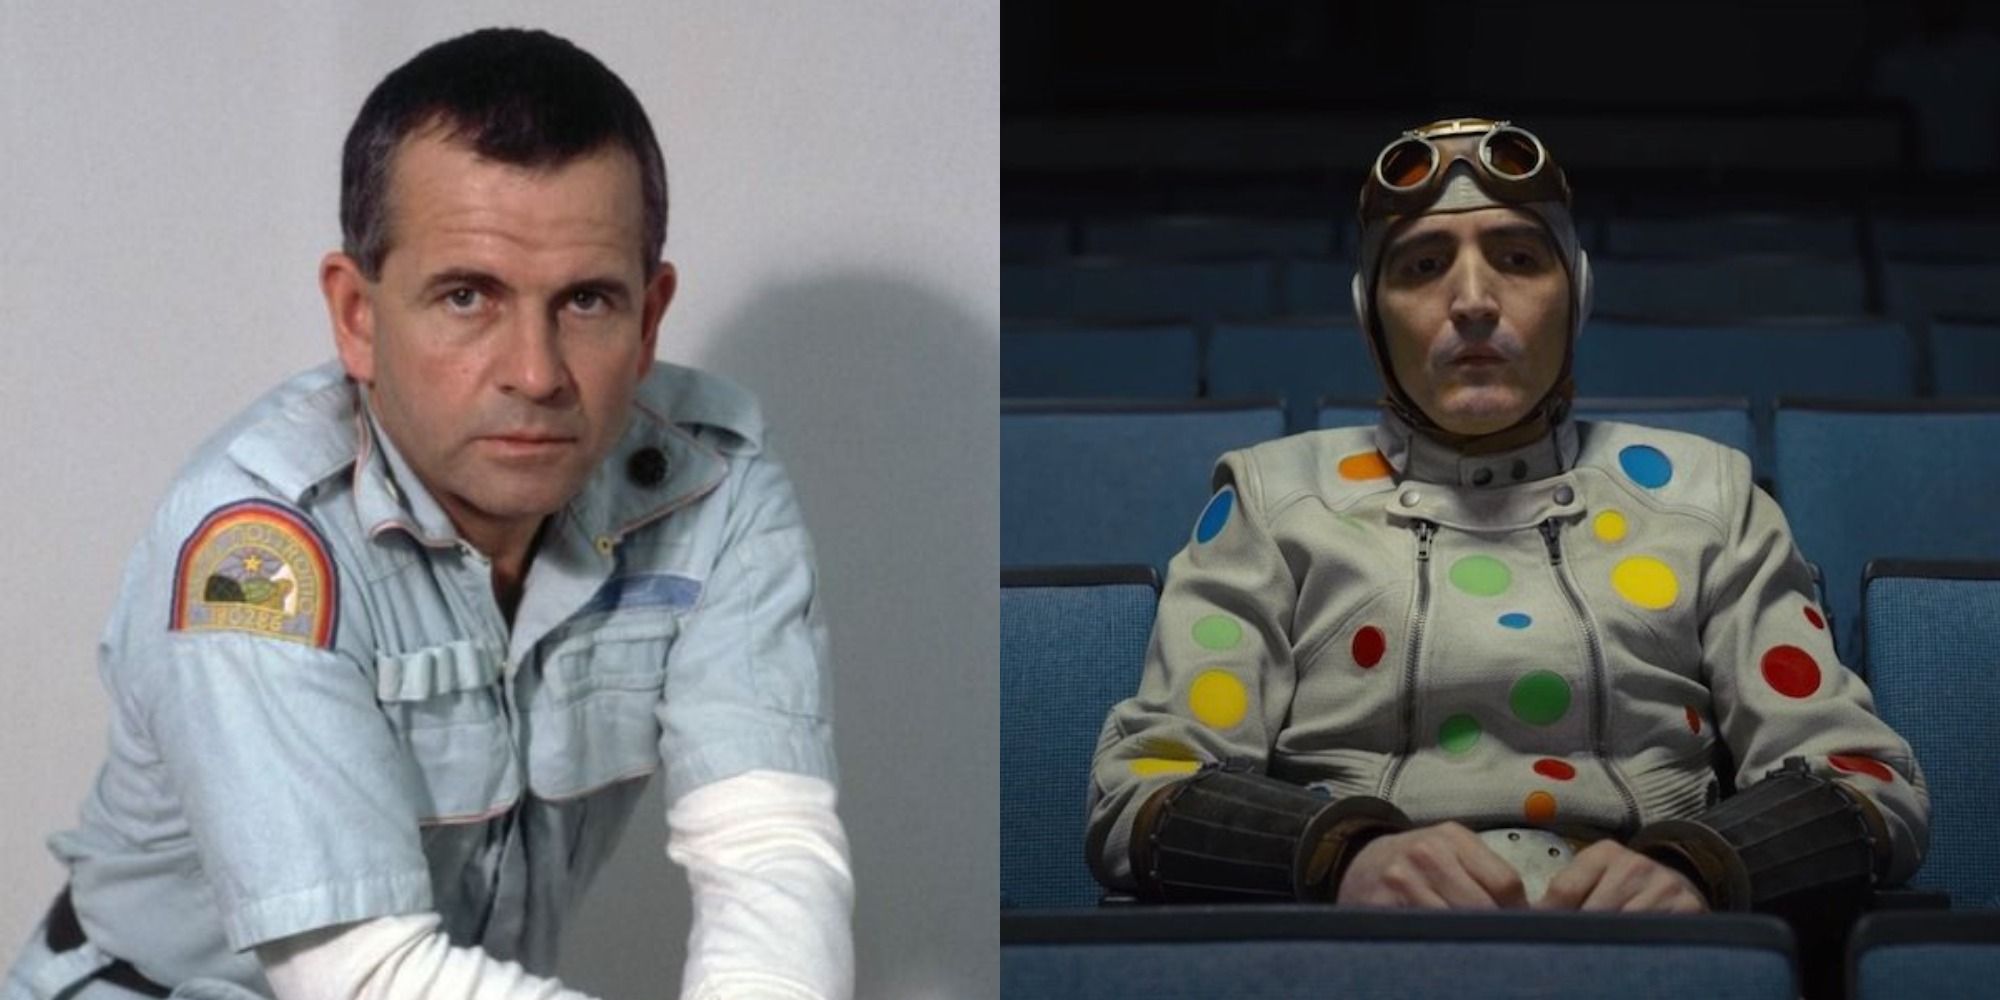 Split image showing Ash in Alien and Polka-Dot Man in The Suicide Squad